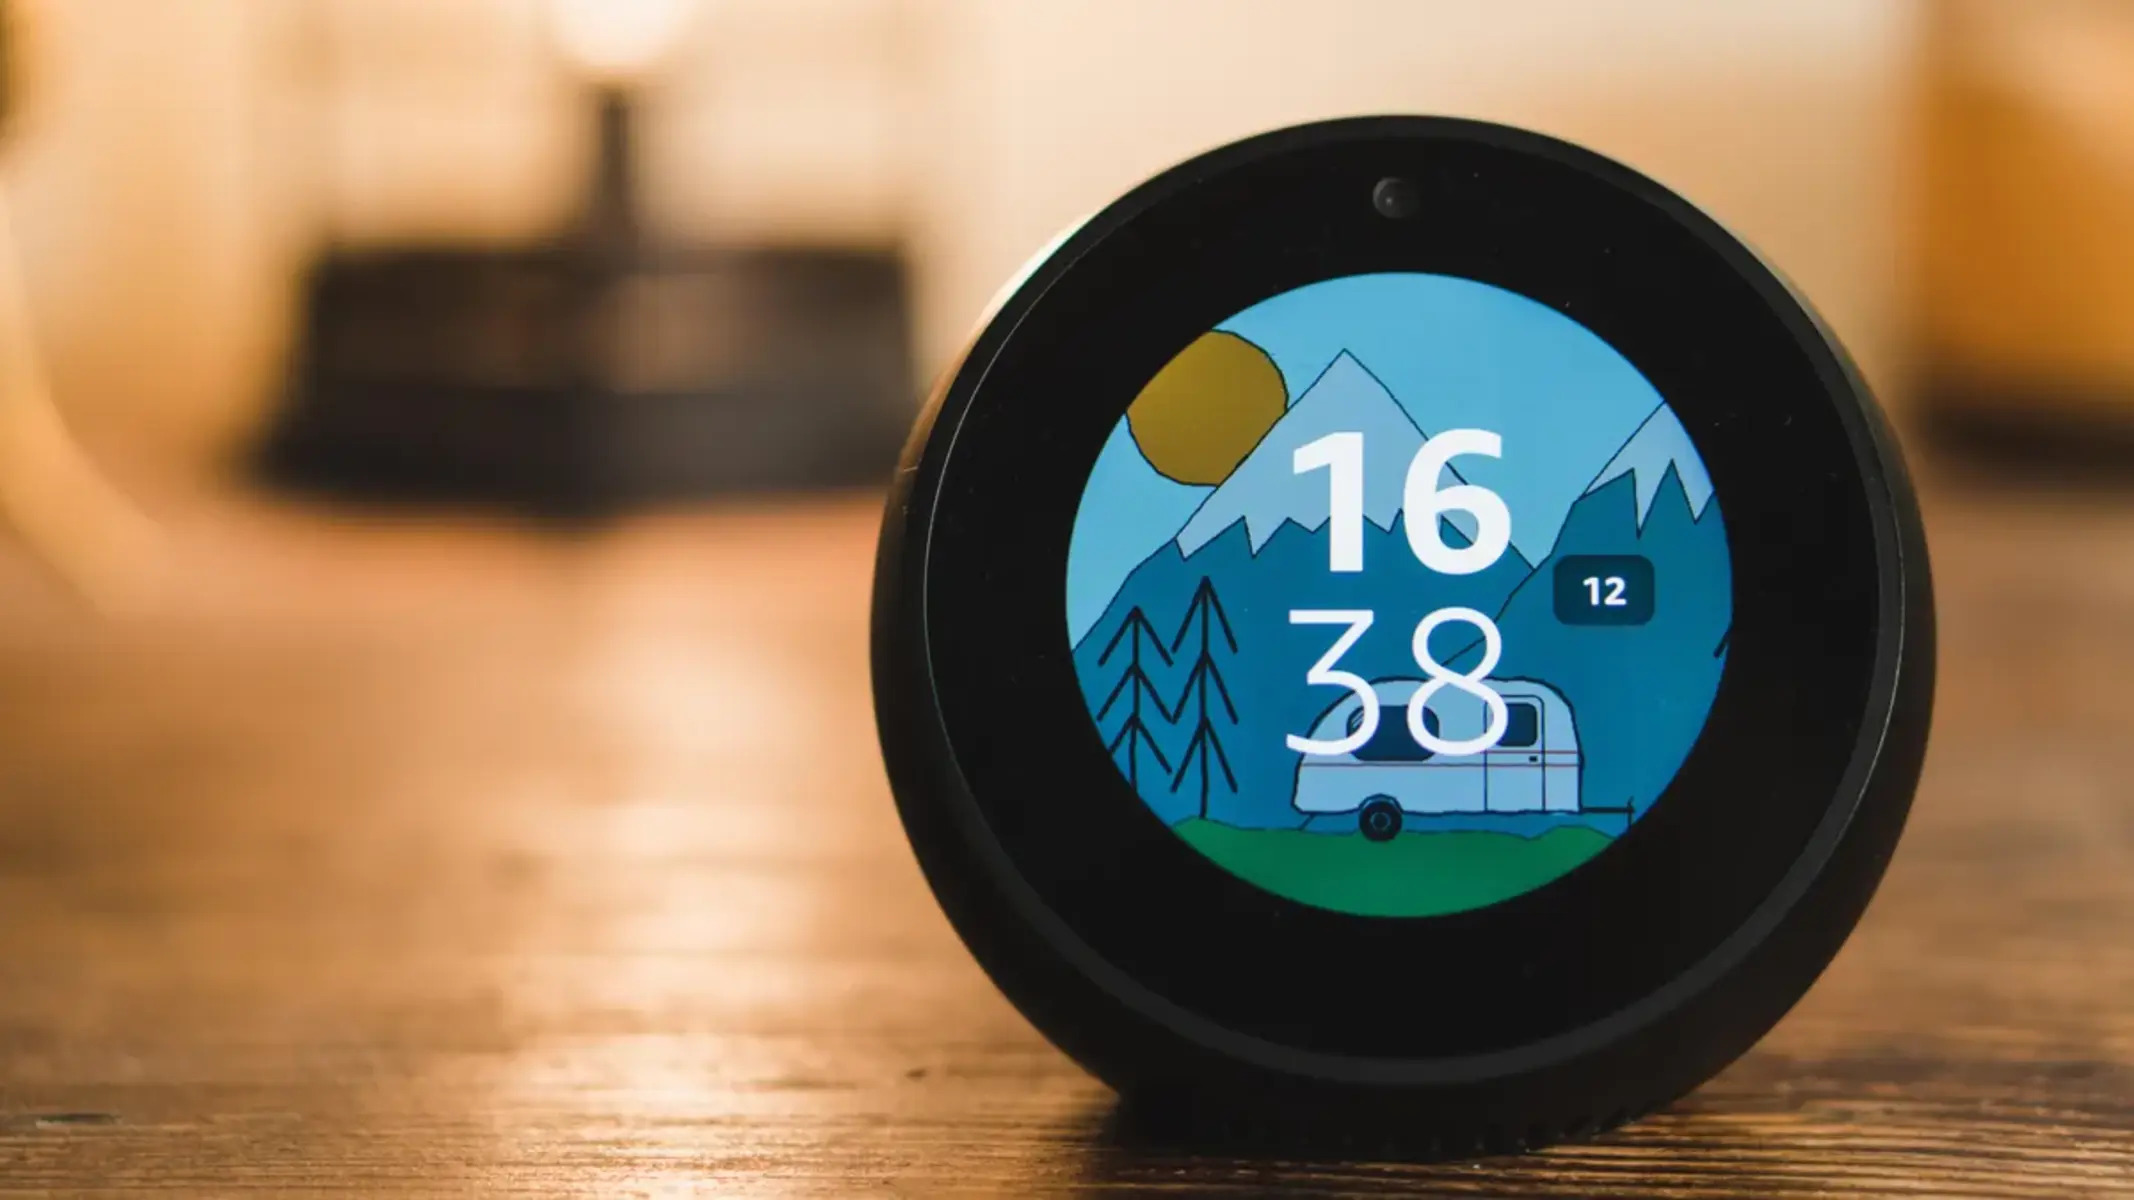 How To Change The Clock Face On The Echo Spot